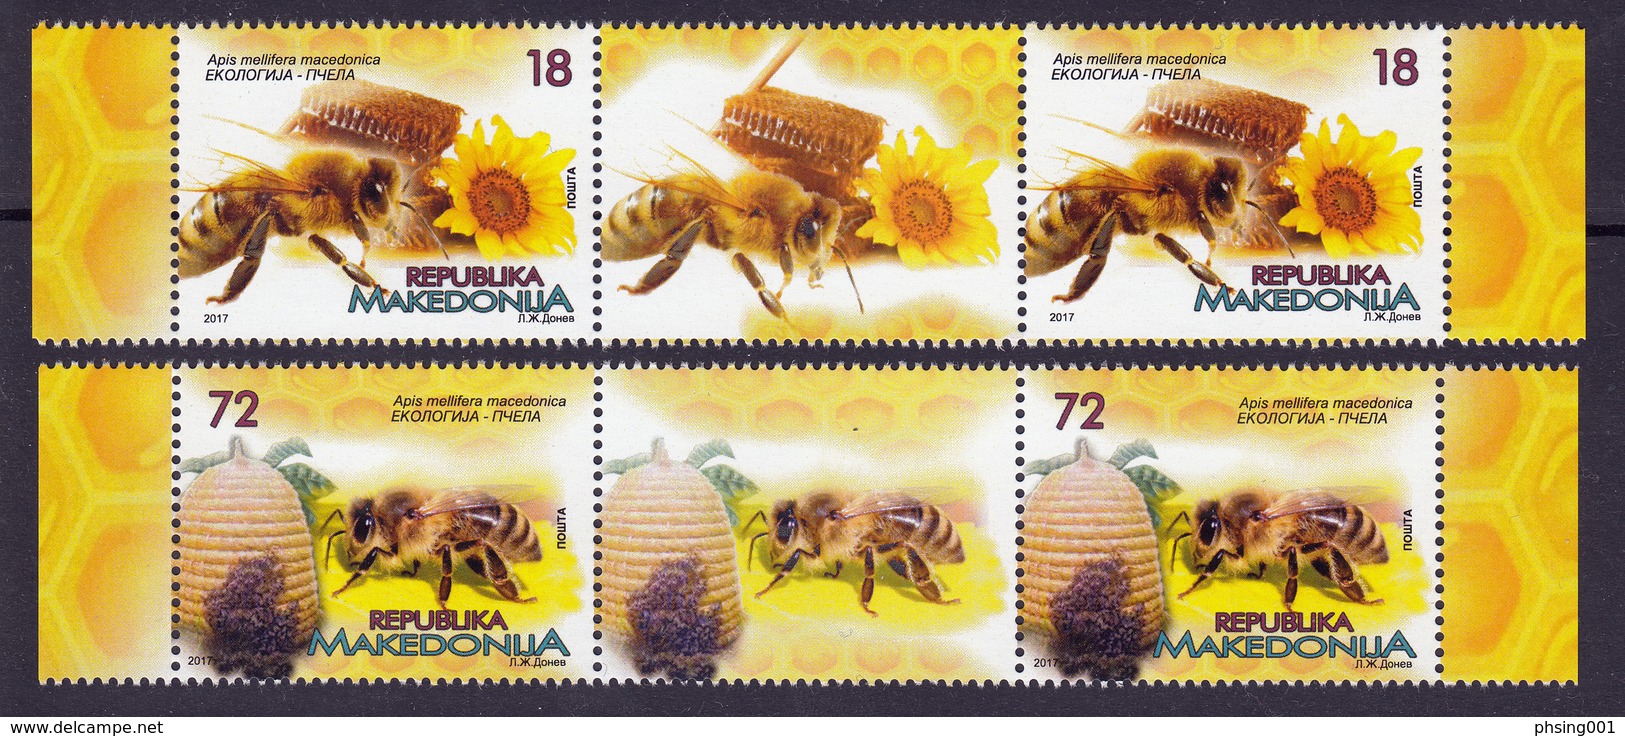 Macedonia 2017 Ecology, Fauna, Insects, Honeybees, Bee, Sunflower, Flowers, Middle Row, 2 Sets With Labels MNH - Bienen